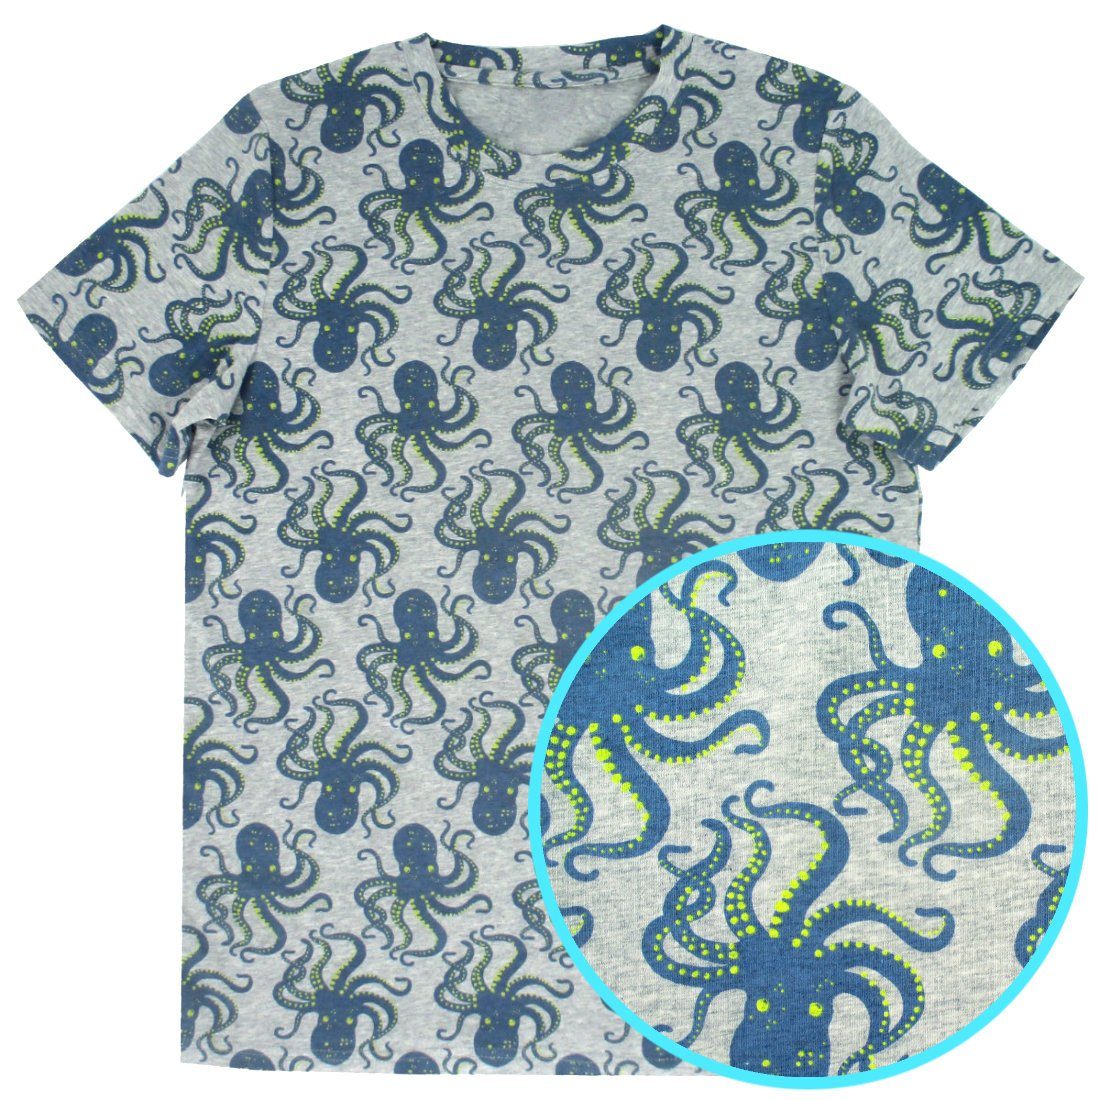 alexmilaychev Menswear Octopus All Over Print Cotton Crew Neck T-Shirt for Men in Grey